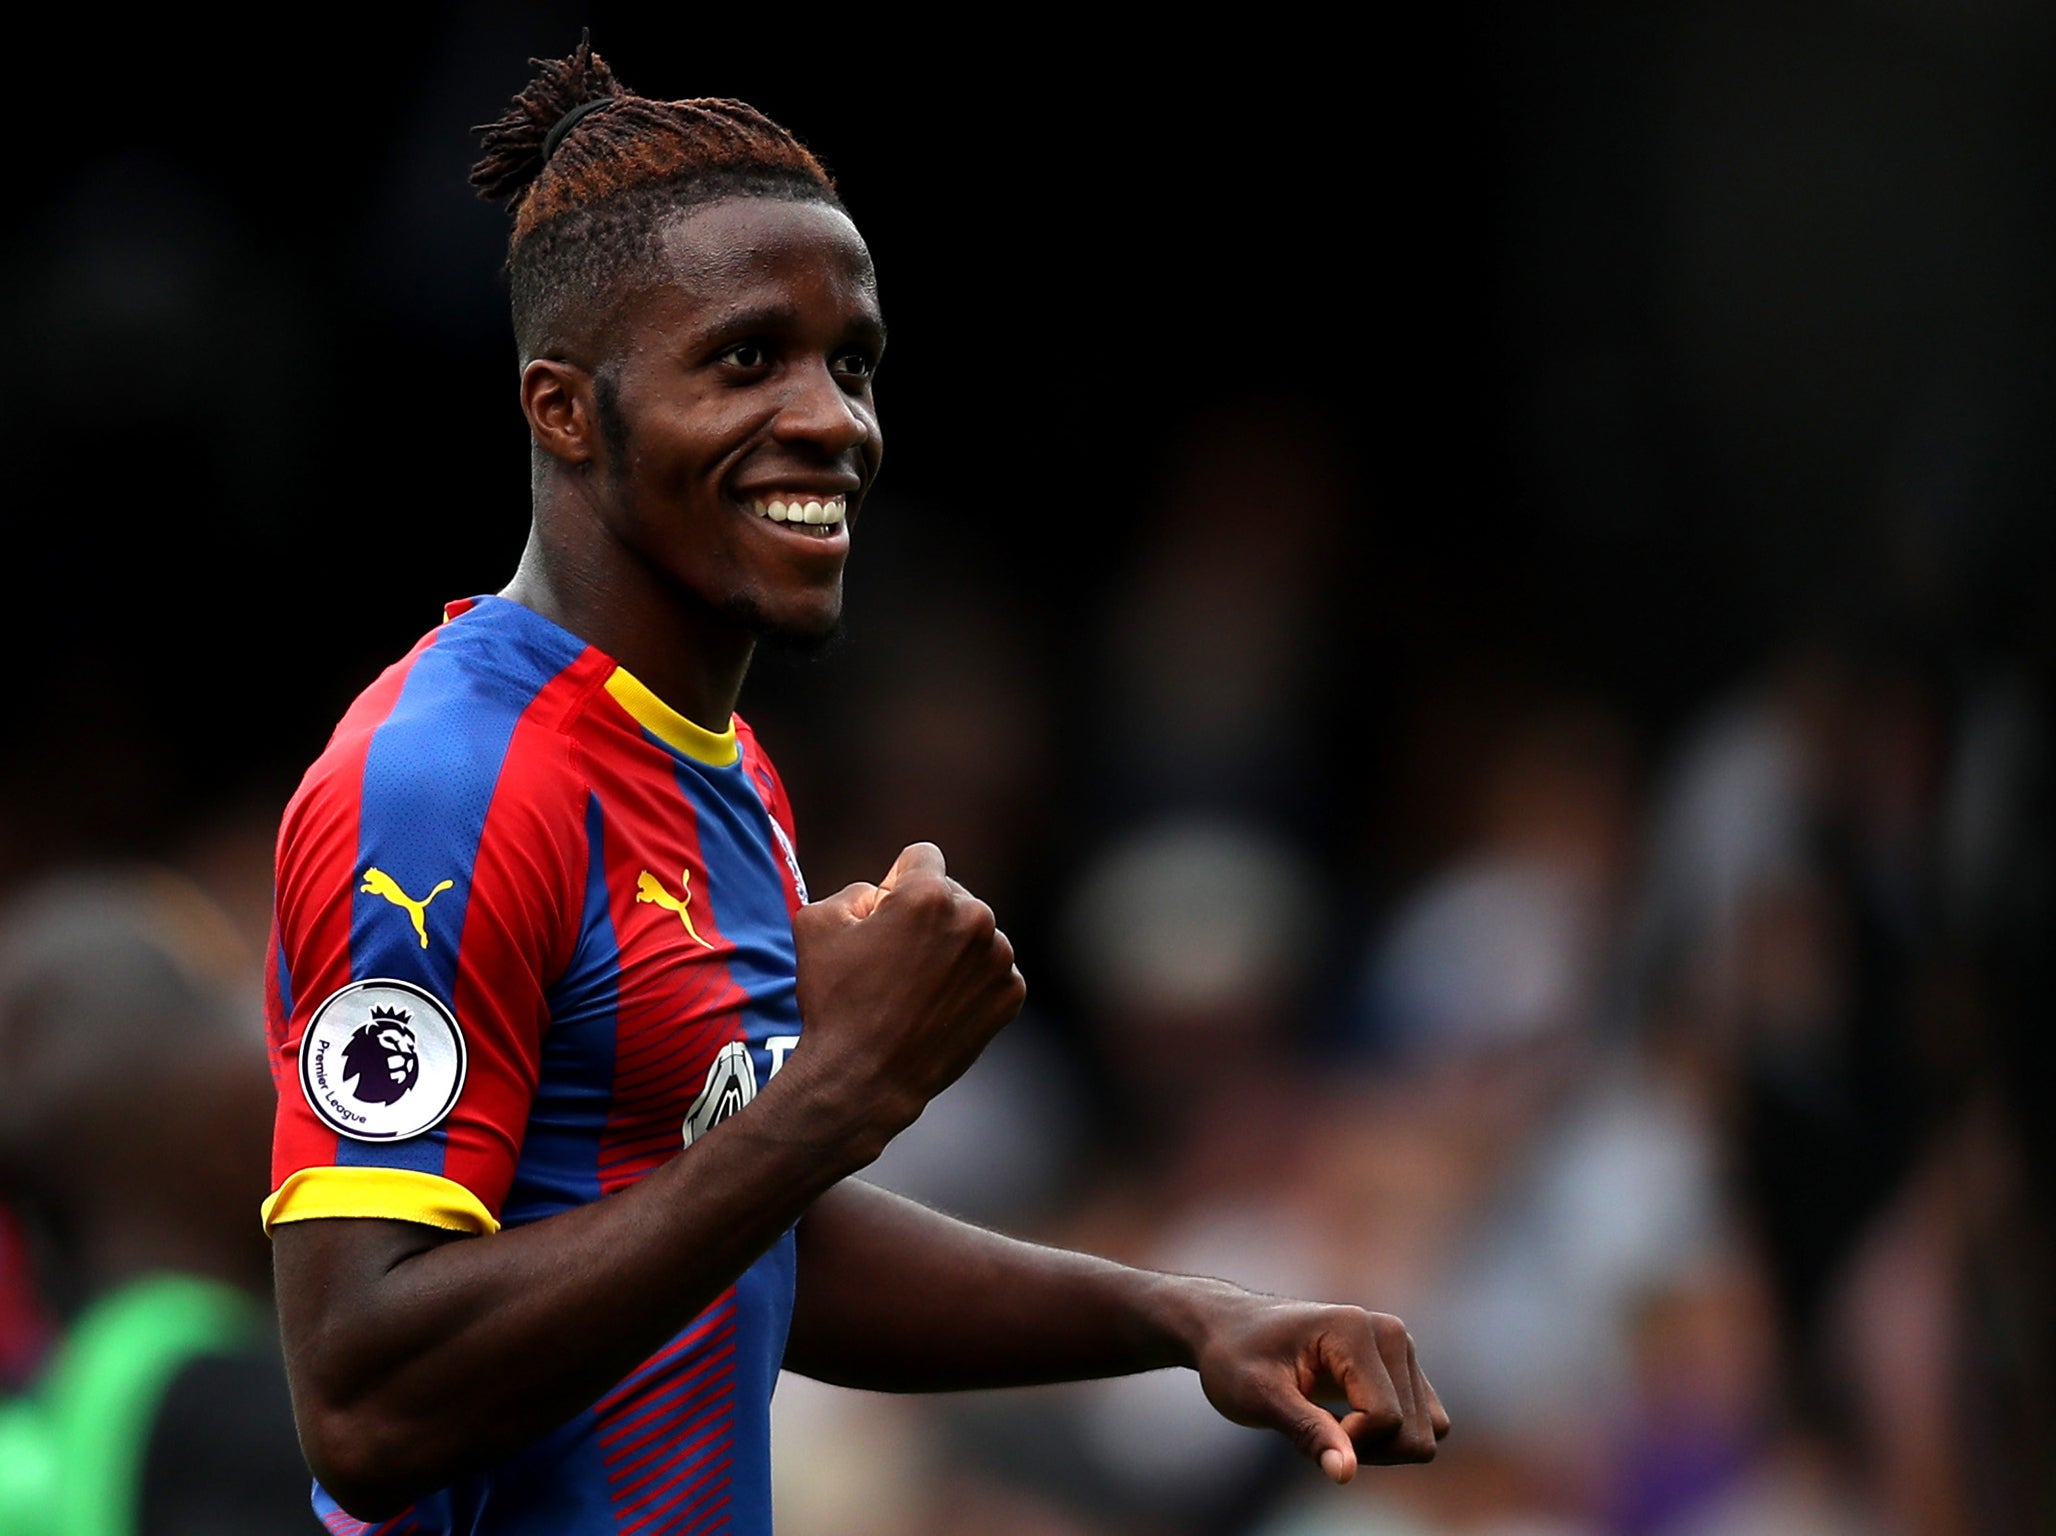 Wilfried Zaha was superb in the 2-0 win over Fulham